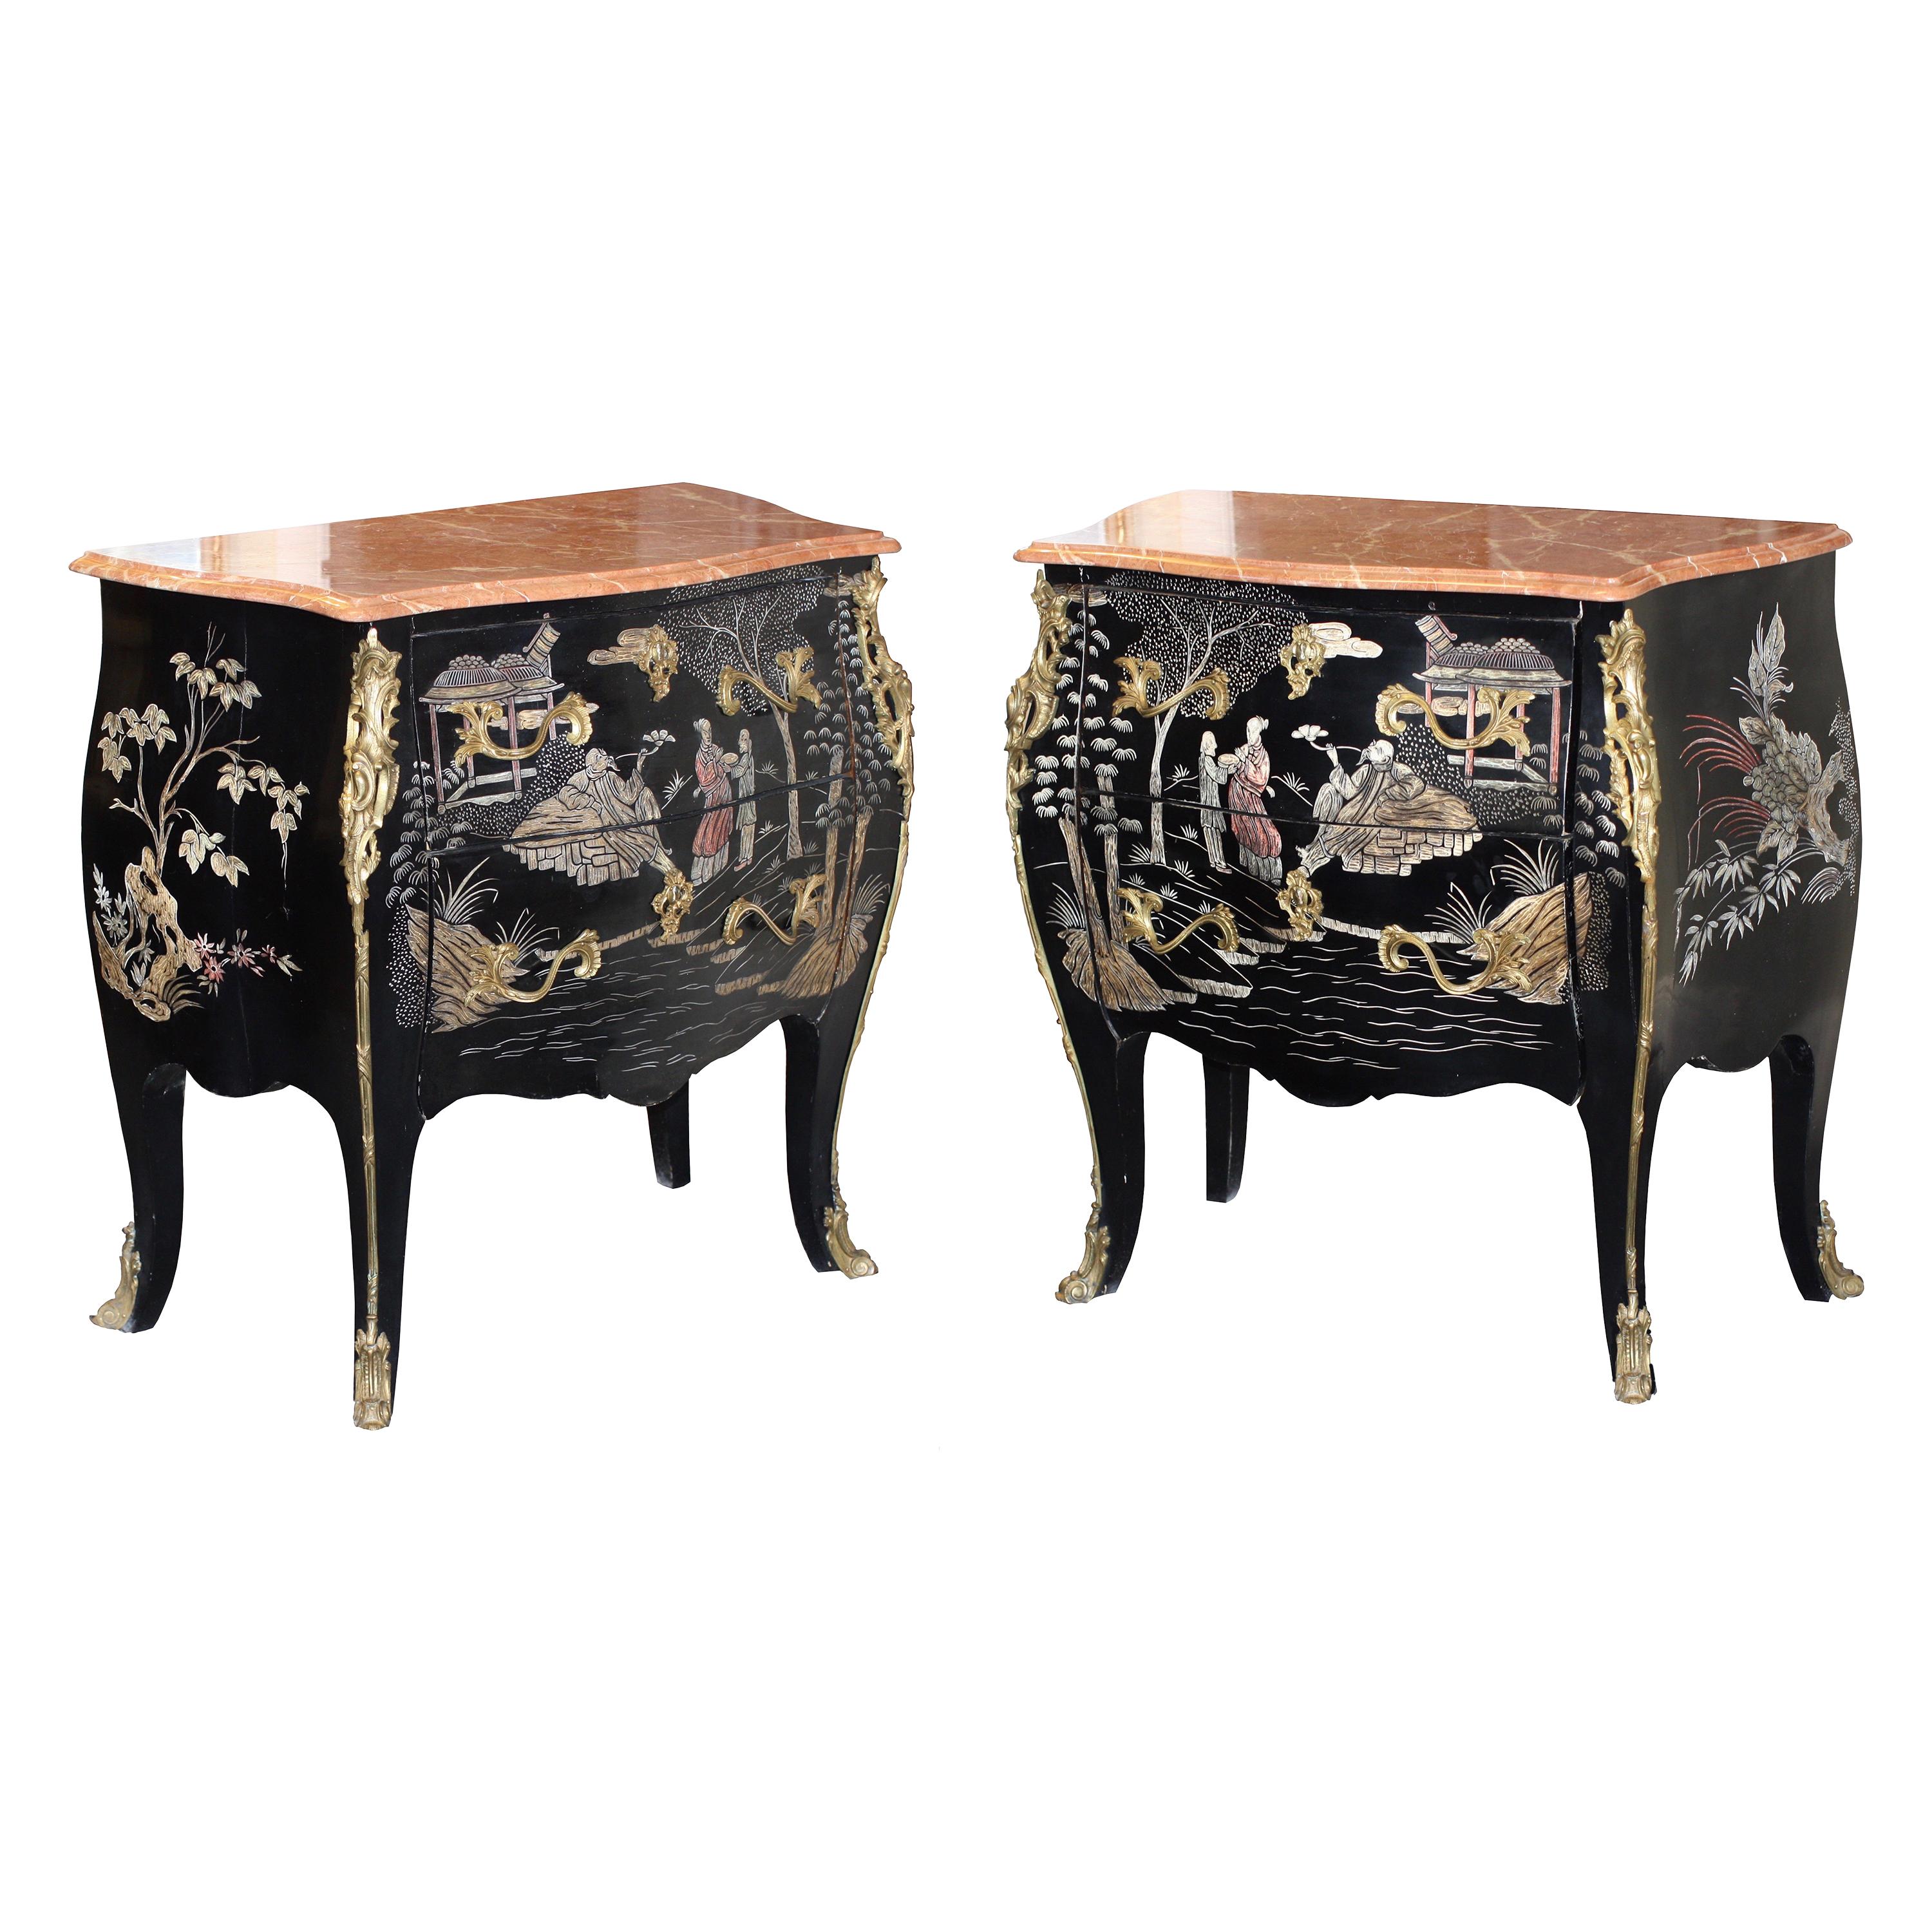 Pair of Gilt Bronze Mounted Black and Polychrome Lacquered Chinoiserie Commodes